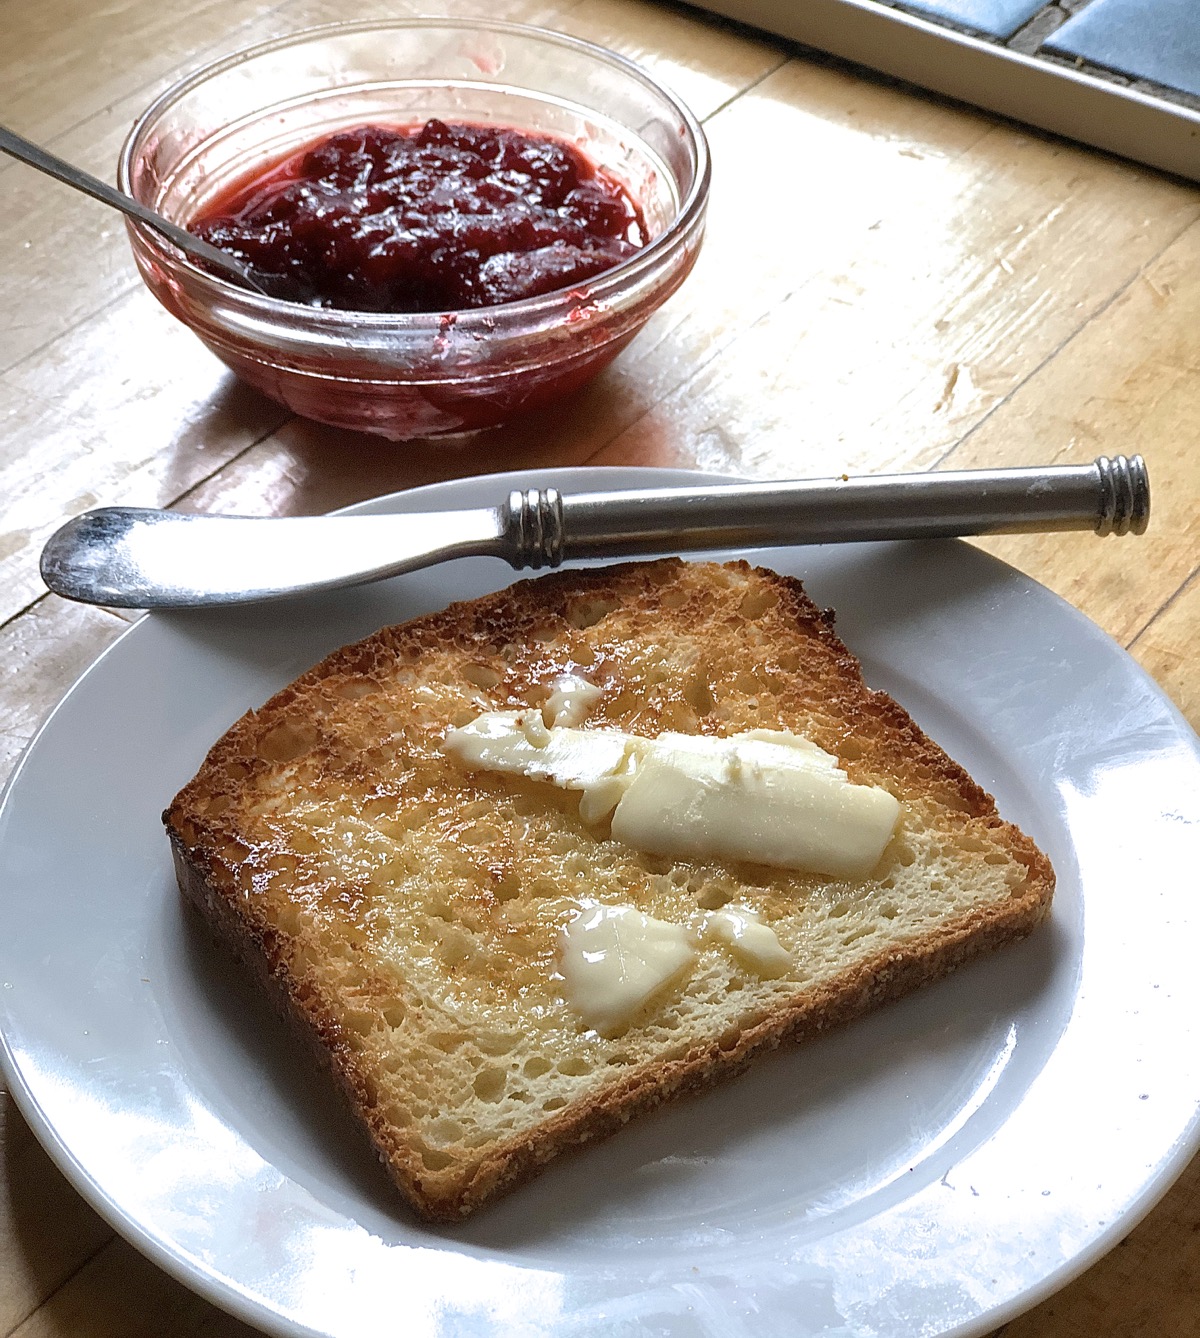 Piece of buttered toast on a plate, jar of strawberry preserves in background.